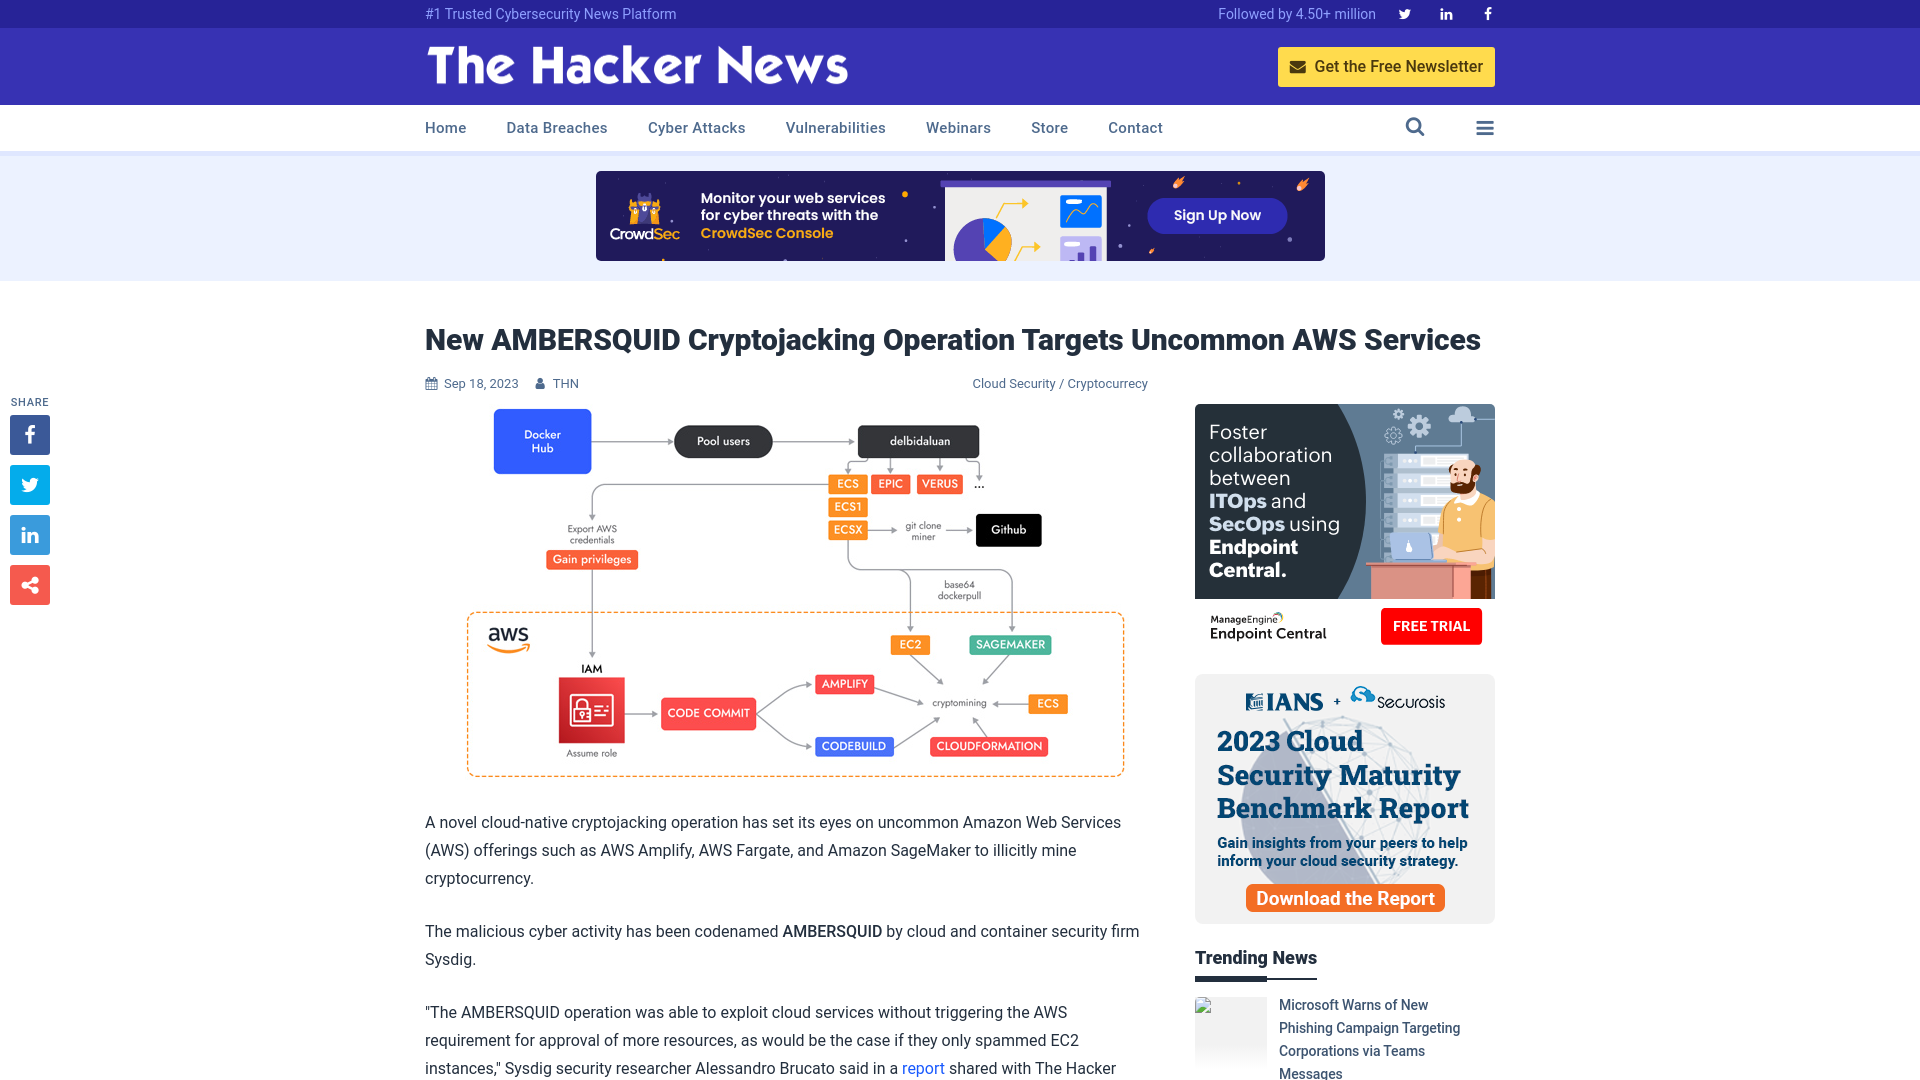 New AMBERSQUID Cryptojacking Operation Targets Uncommon AWS Services